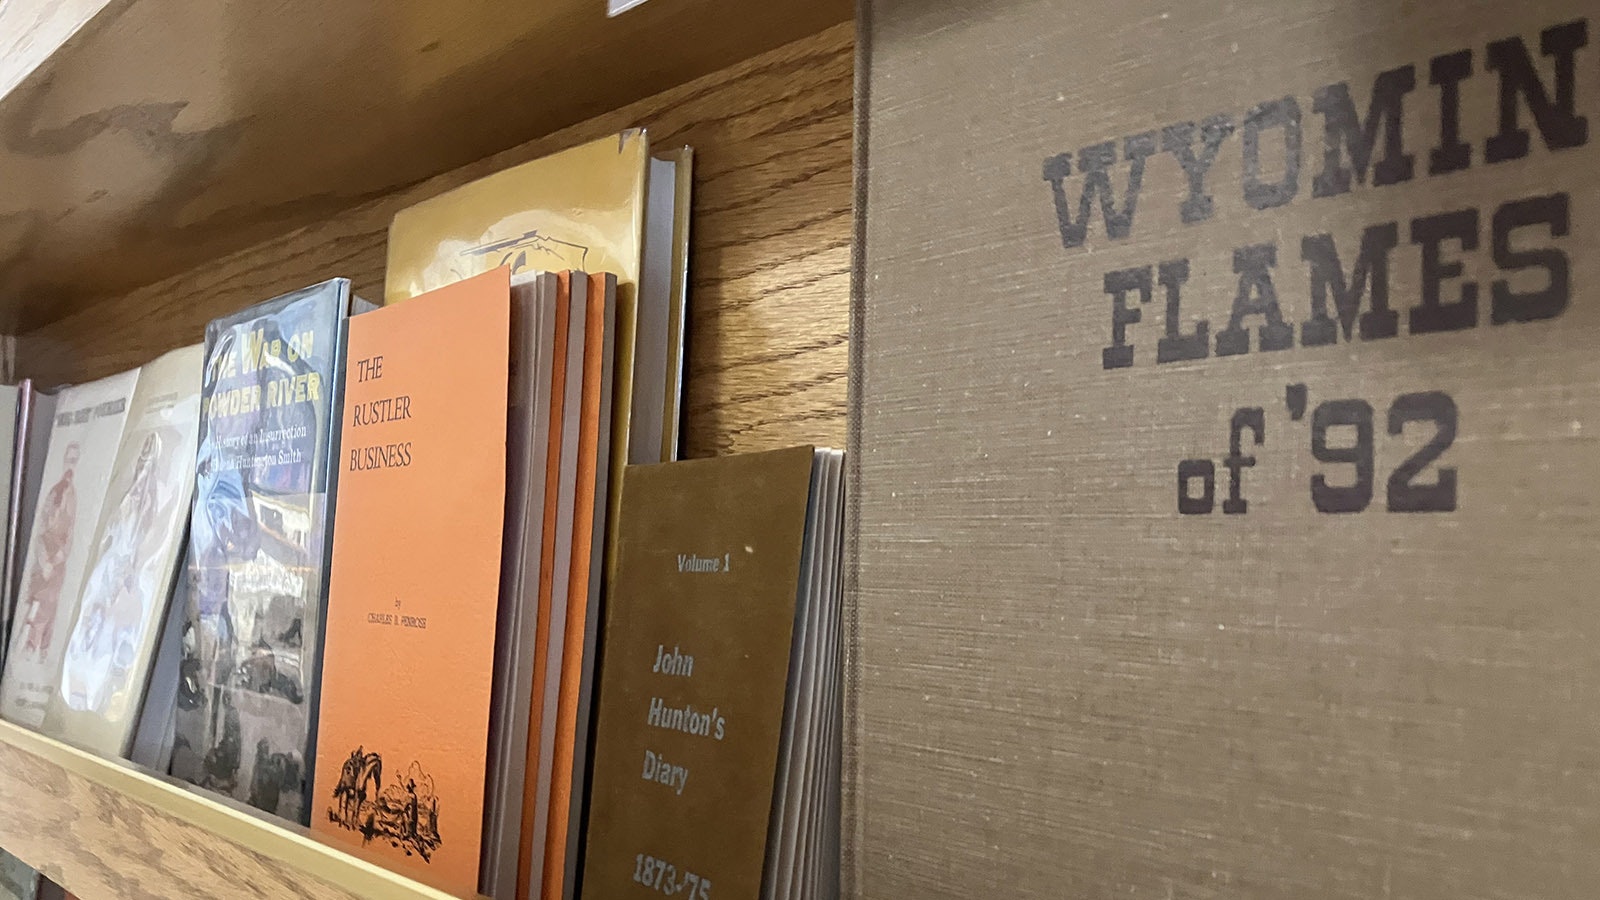 Jen’s Books specializes in collecting older books on the history of Wyoming and the West.